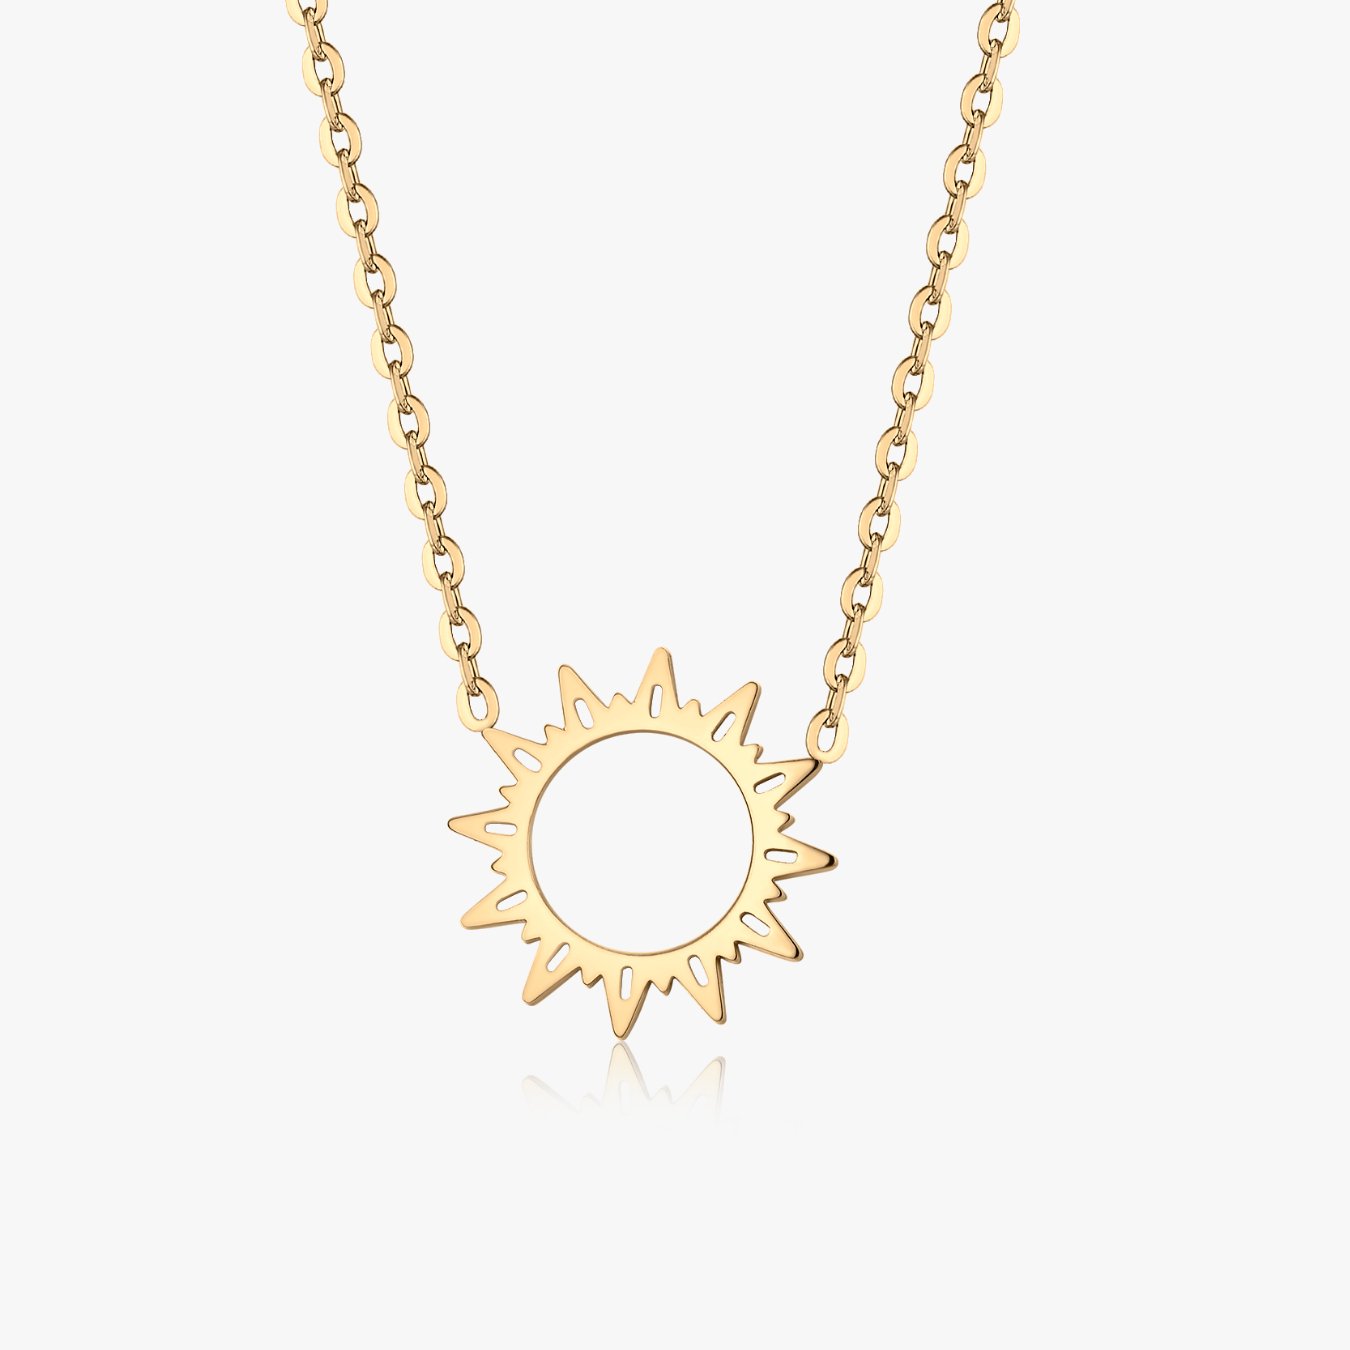 Sunburst Necklace in Gold - Flaire & Co.